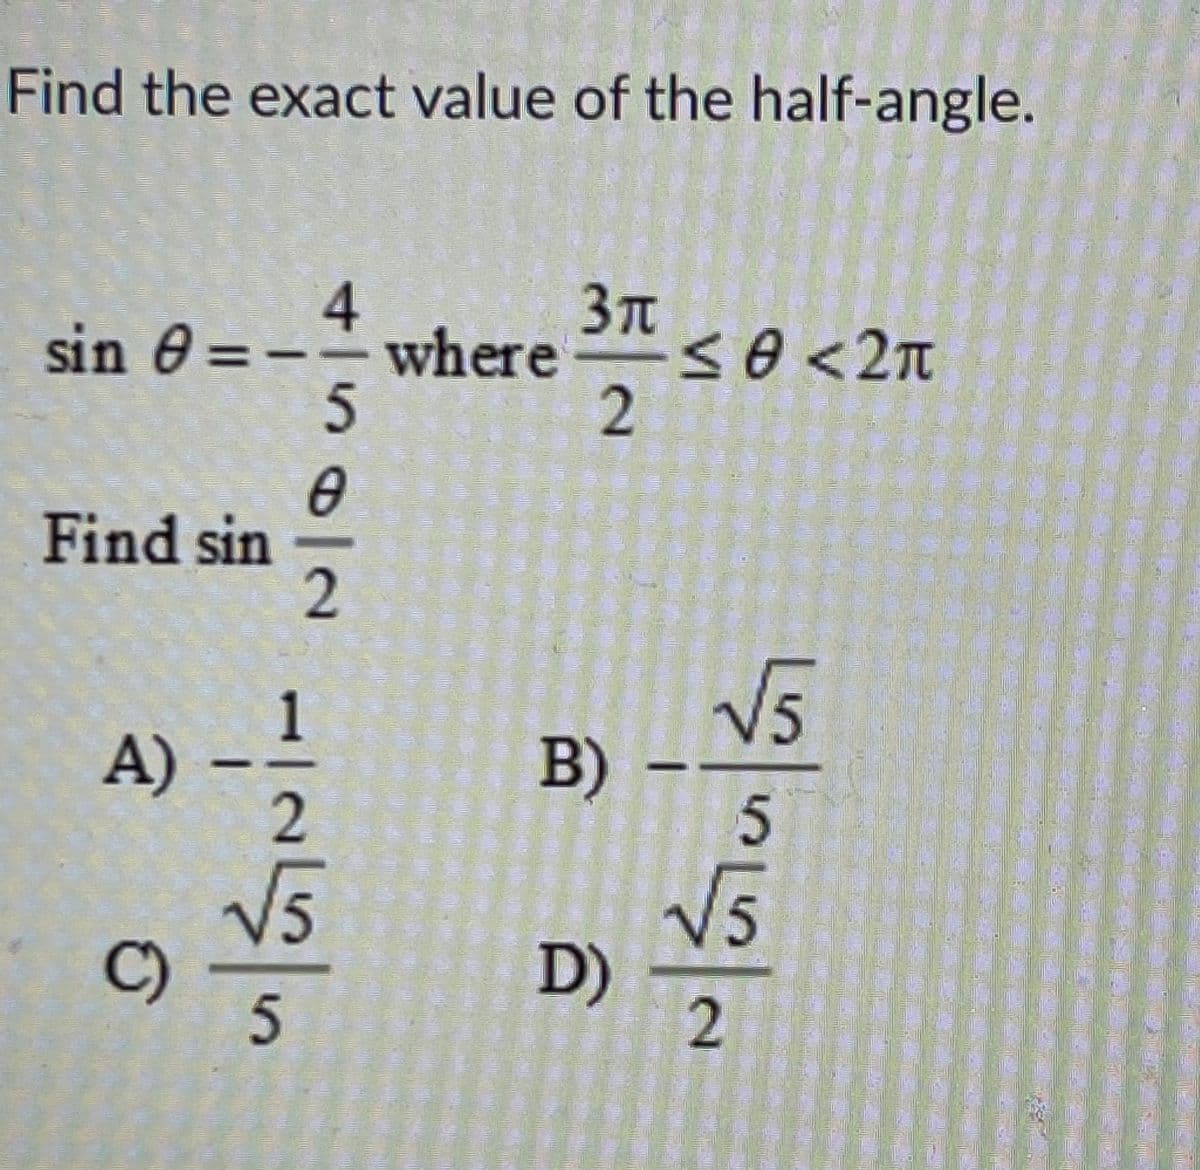 Find the exact value of the half-angle.
4.
sin 0 = --where
5
3n
< e <2n
Find sin
1
A)-
V5
B)
5.
C)
/5
D)
5.
2.
2.
